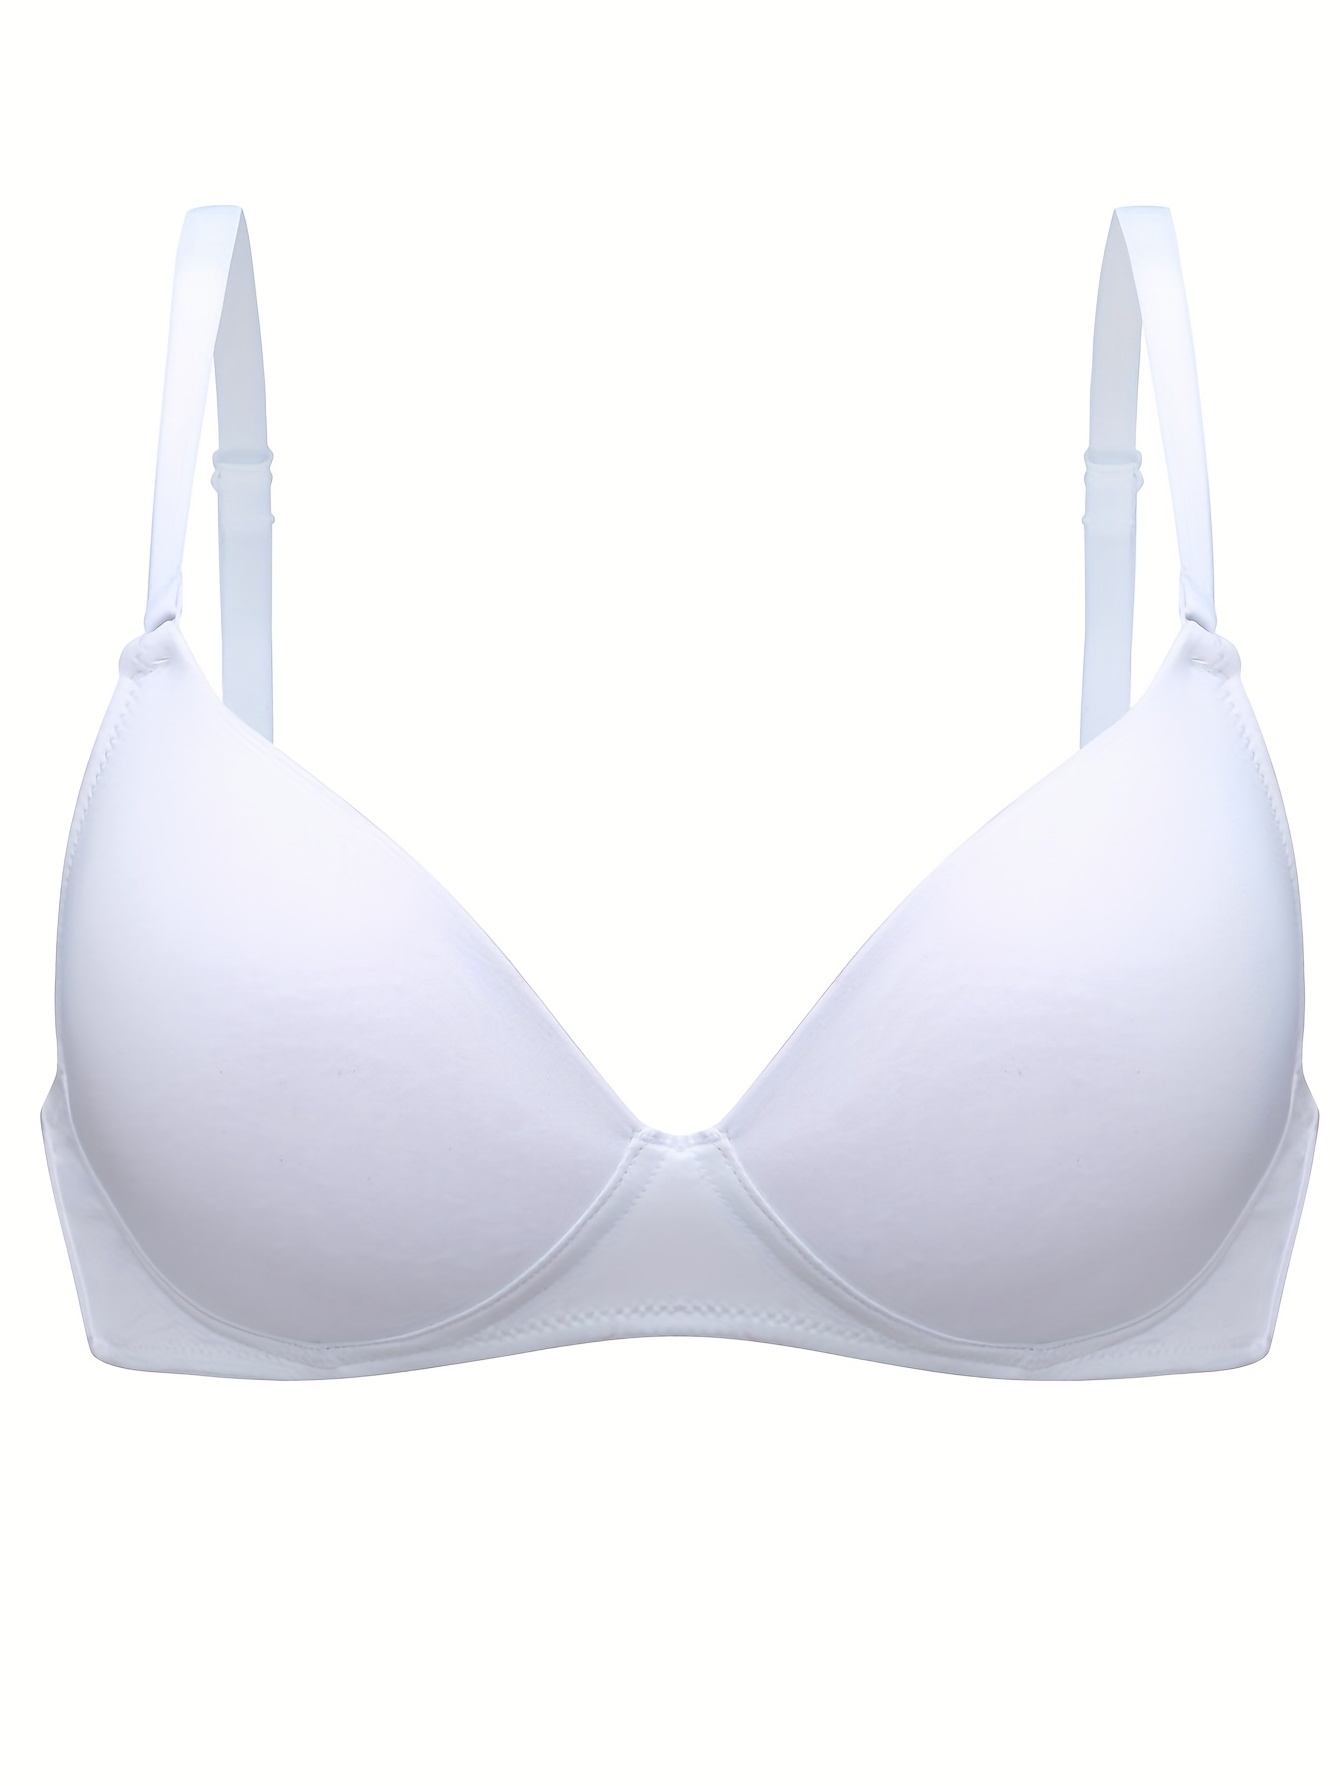 Invisible Underwire Bra For Women - Push Up, Solid Transparent, Back Closure